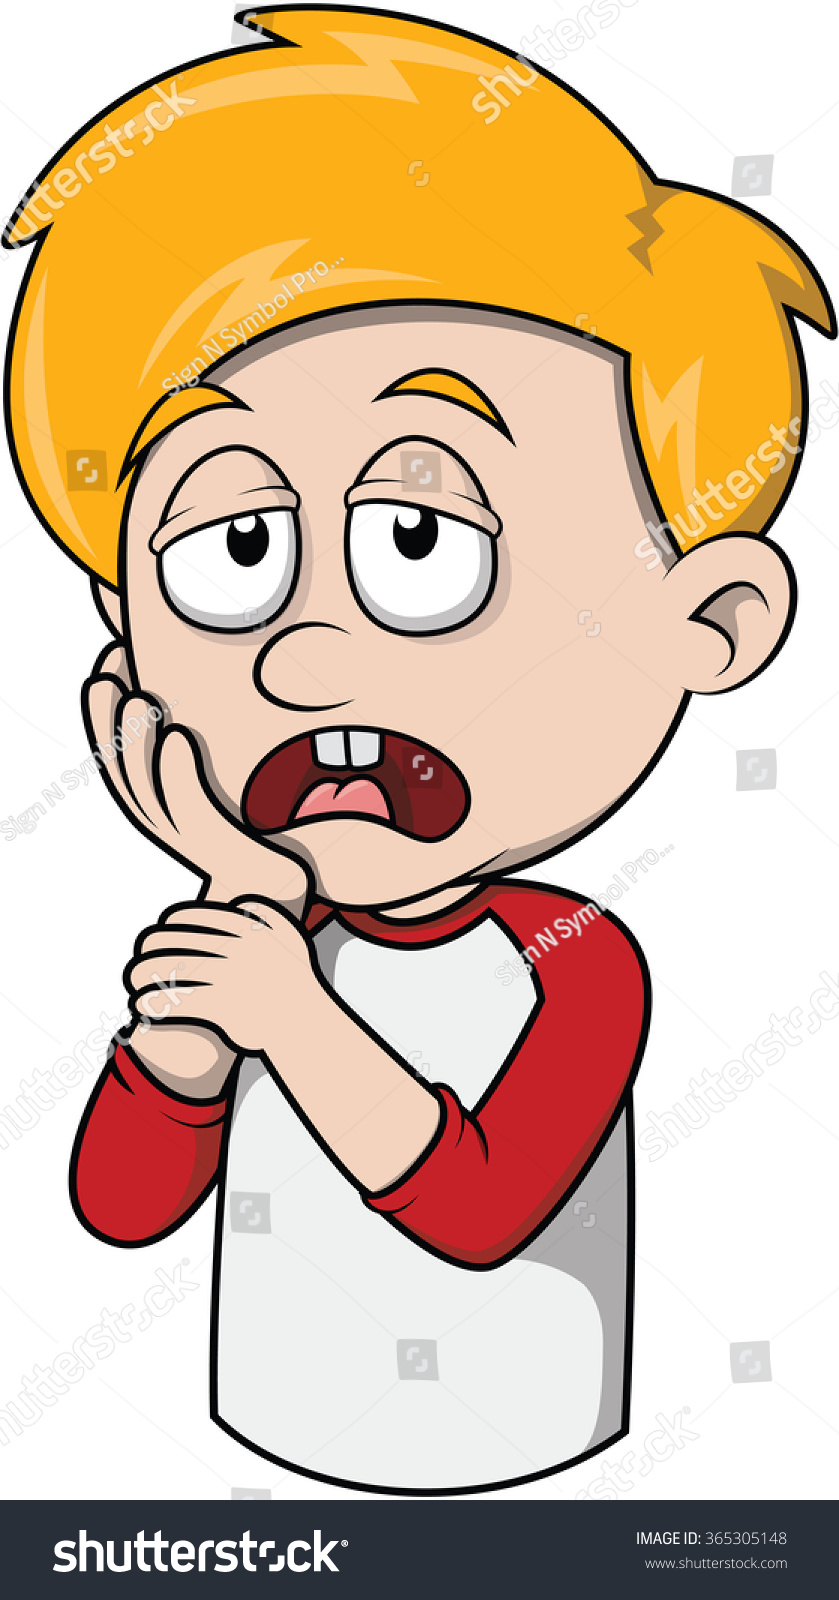 toothache clipart - photo #27